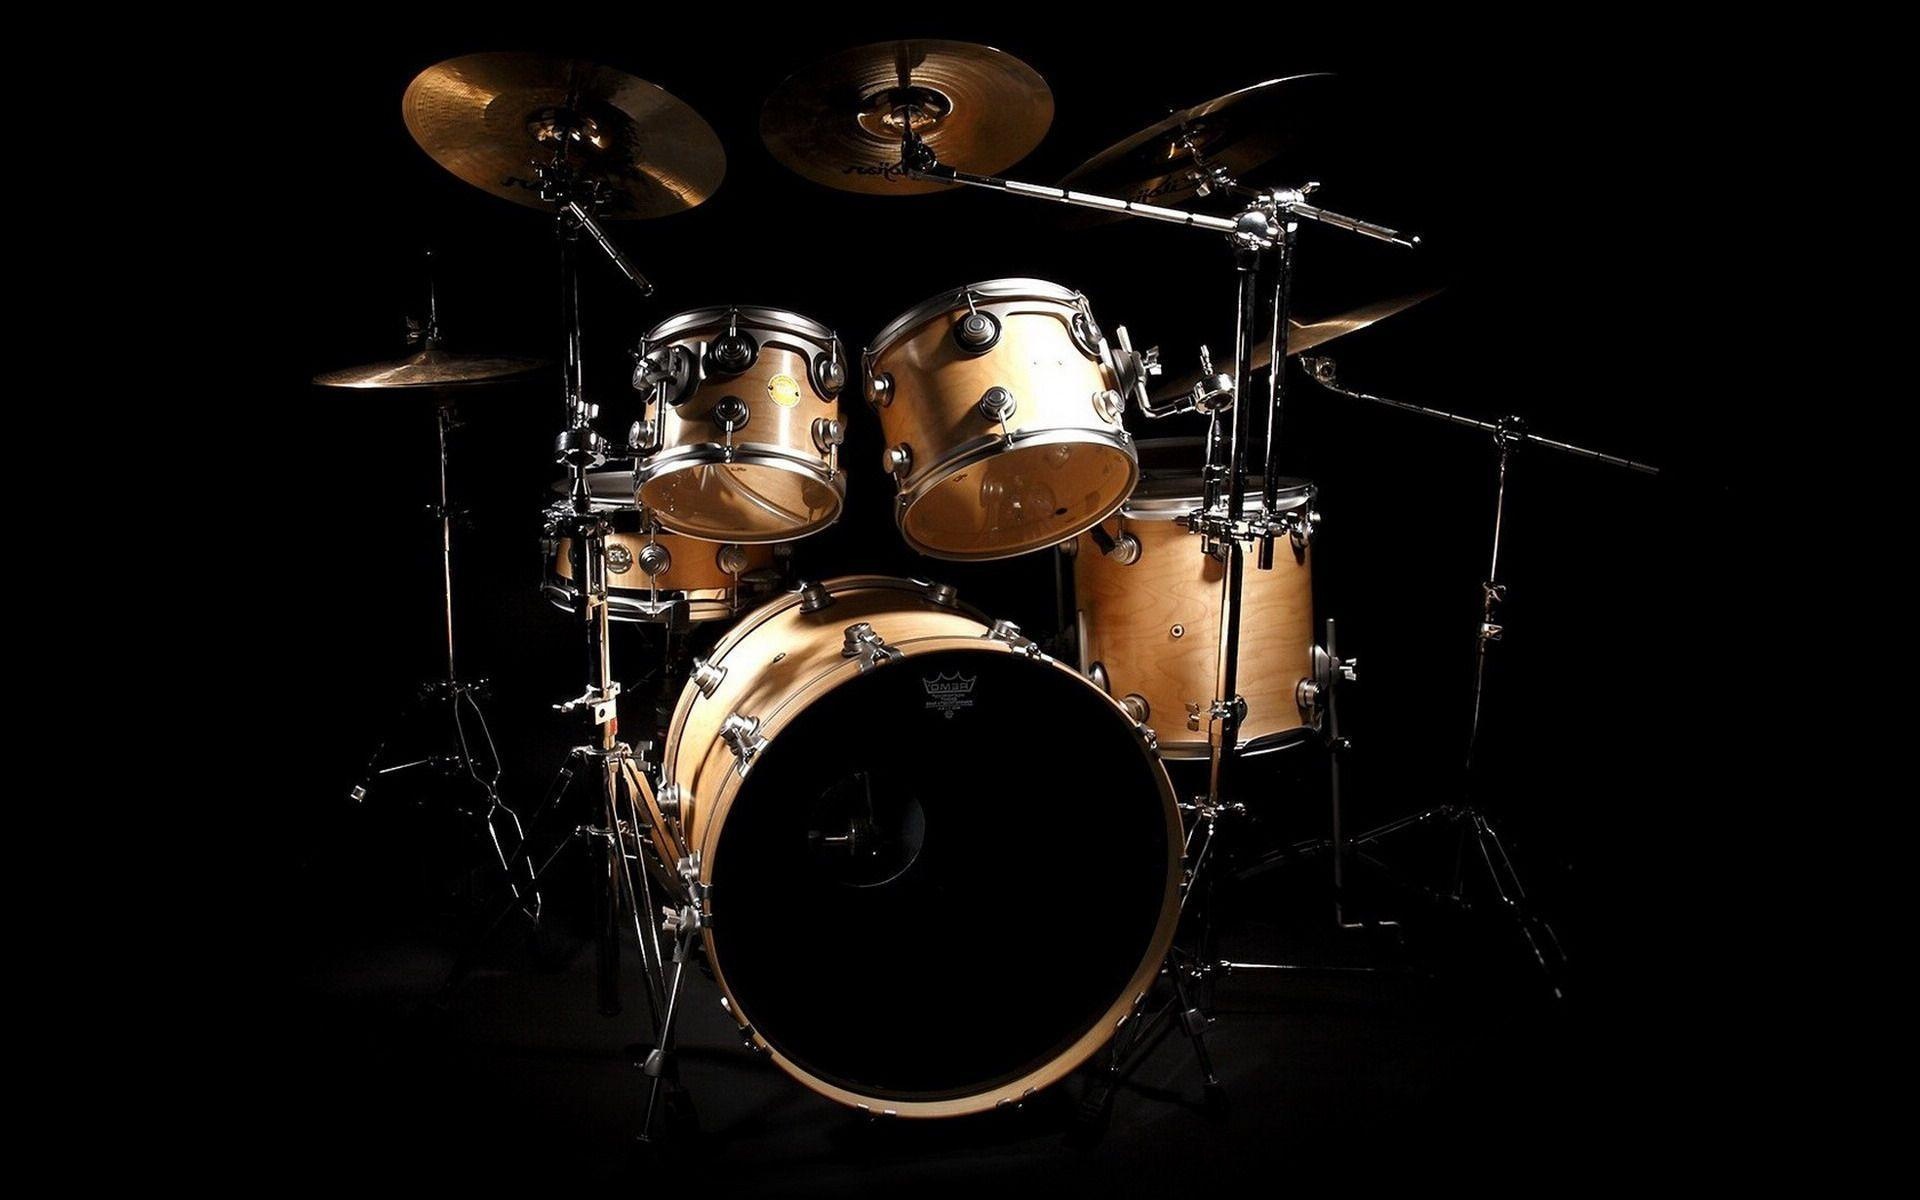 Musical Instruments: A mix of drums, A bass drum, A snare drum, Toms, Hi-hat, Cymbals mounted on stands. 1920x1200 HD Background.